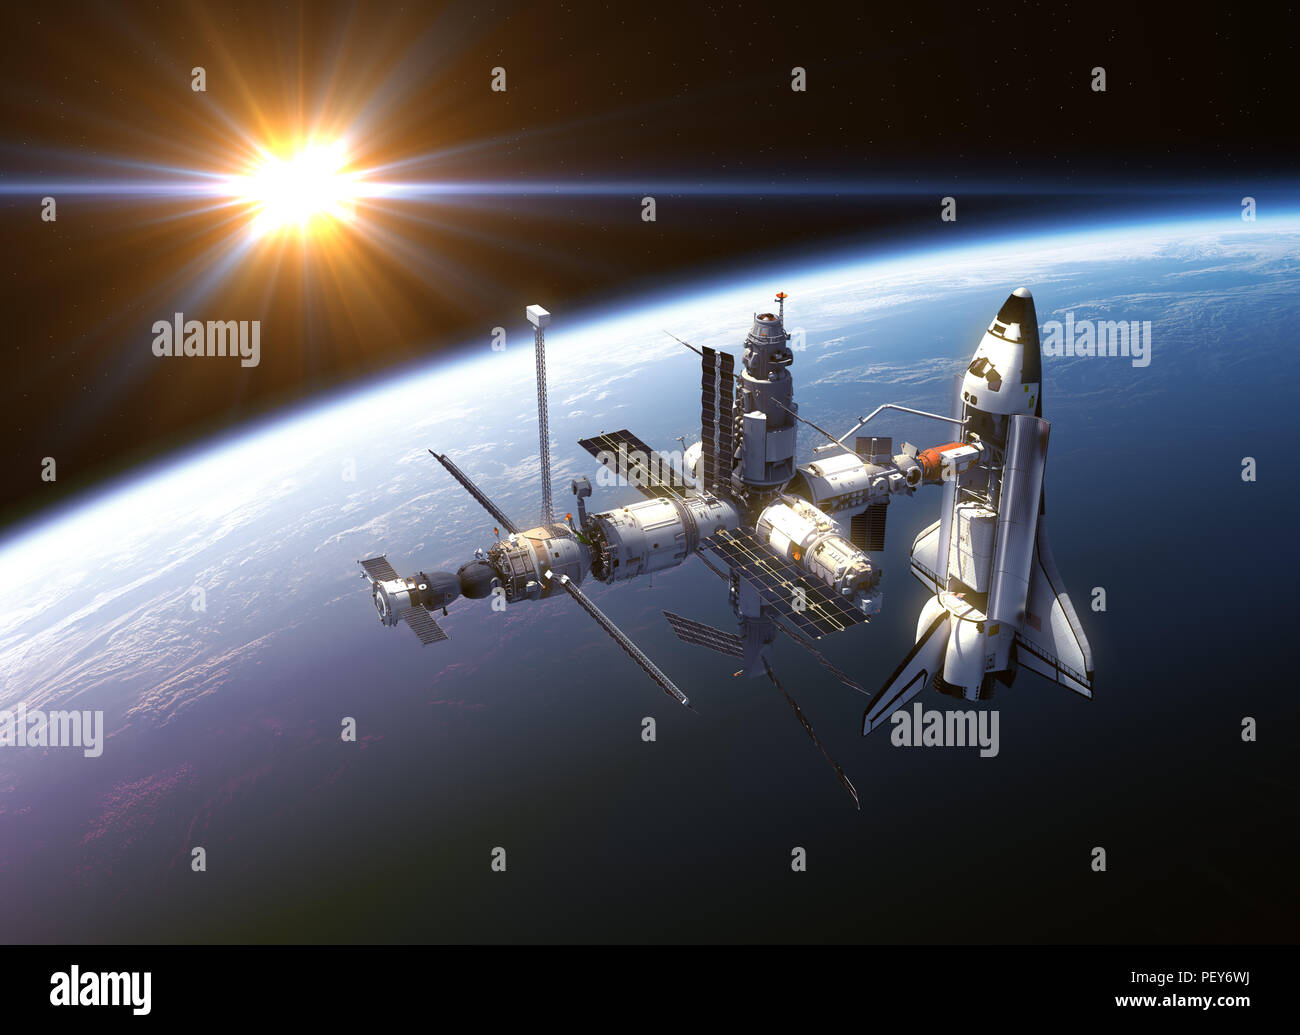 Space Shuttle And Space Station In The Rays Of Sun. 3D Illustration. Stock Photo